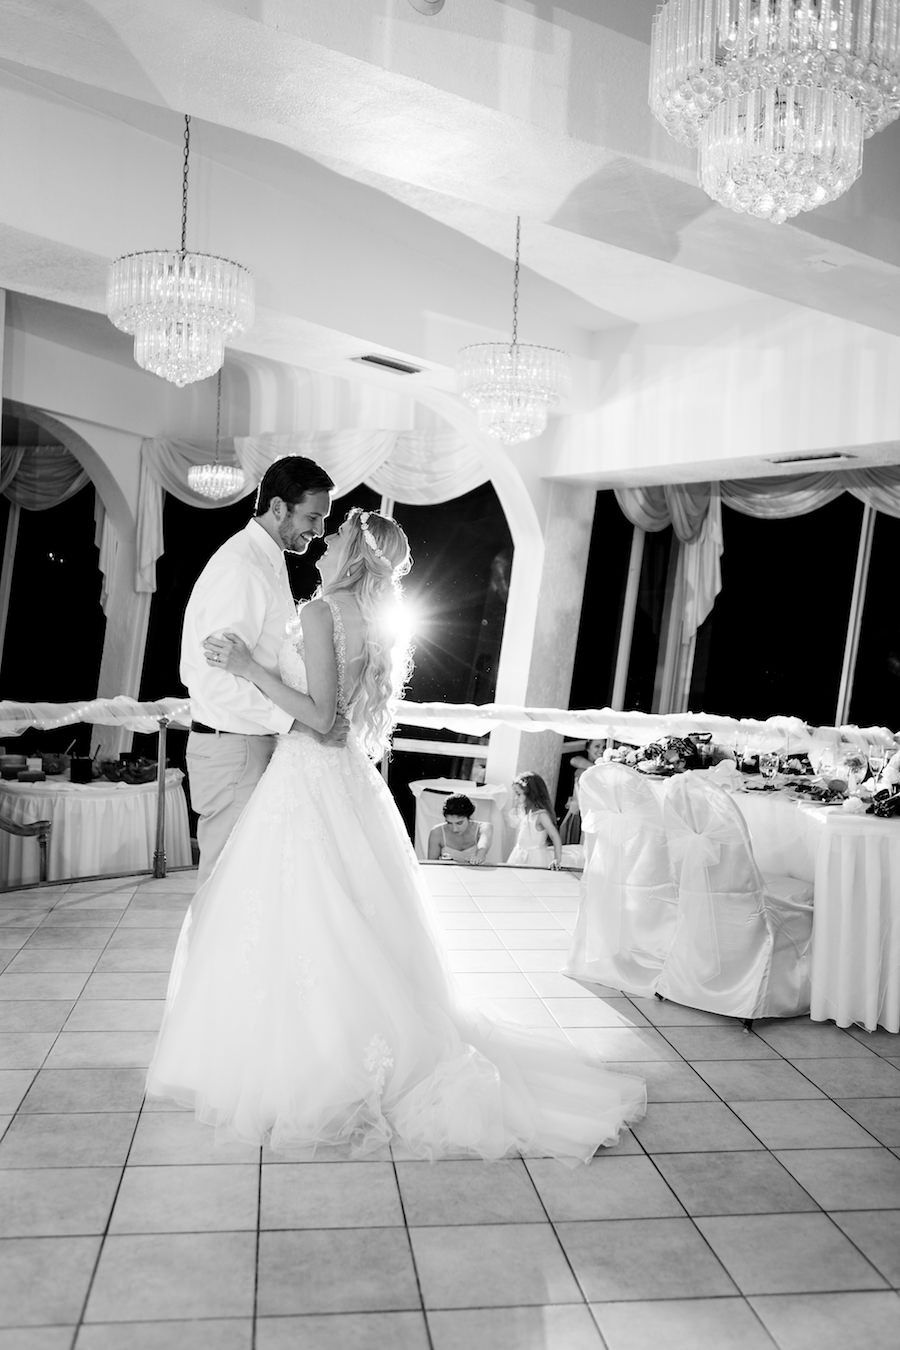 Bride and Groom First Dance on Wedding Day Portrait | Tampa Bay Wedding Photographer Kera Photography